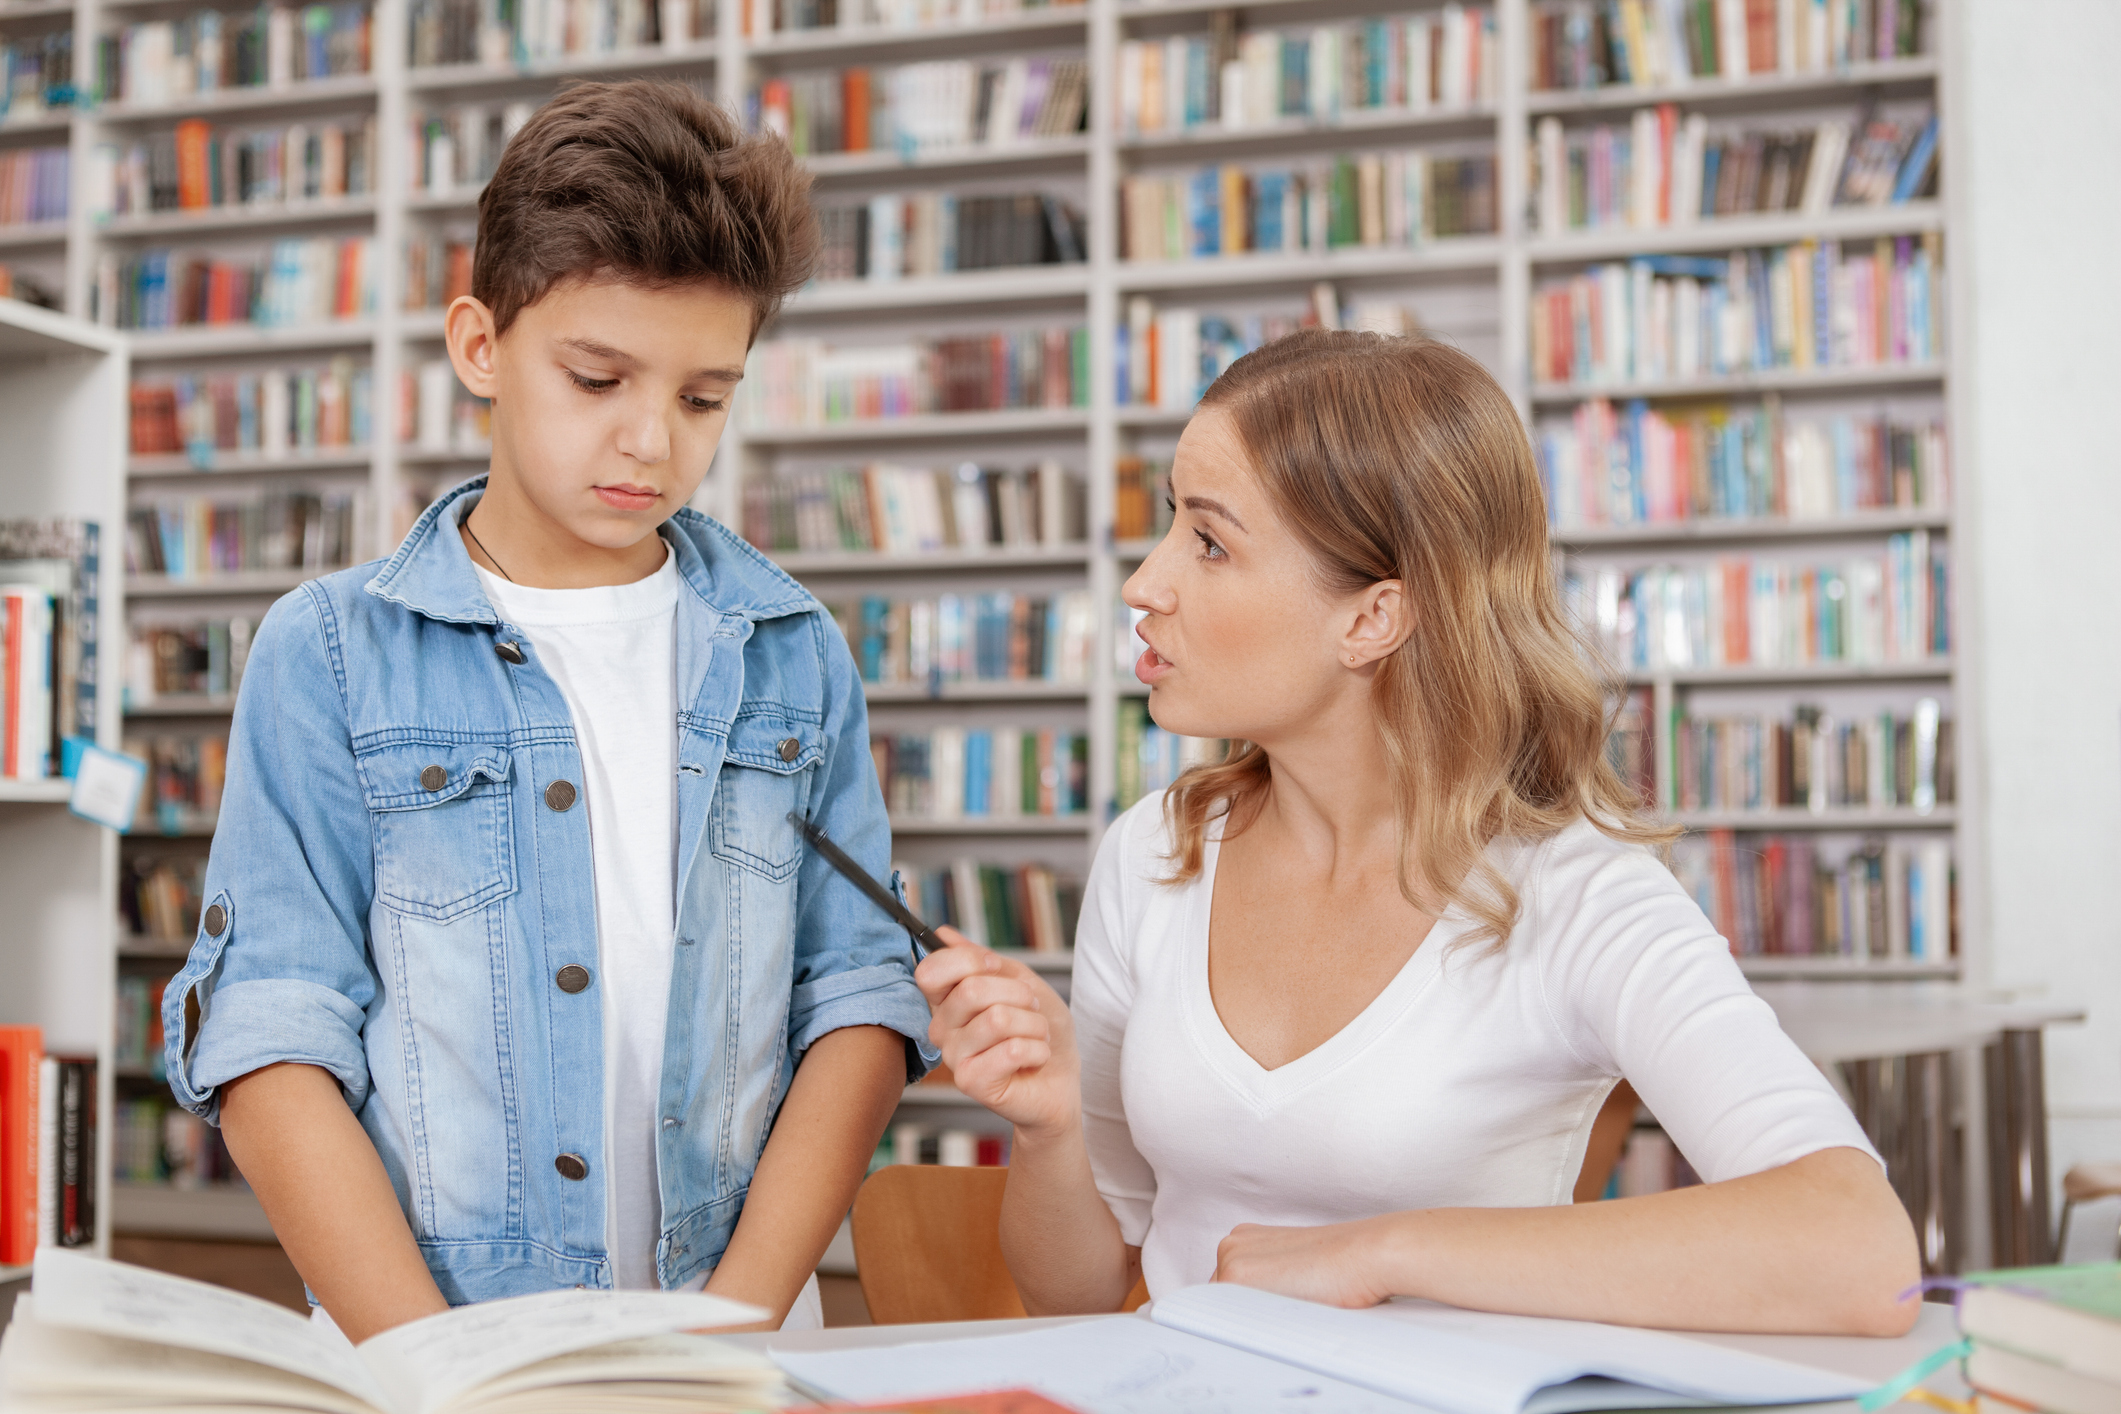 Cute young boy studying with his mom at the library